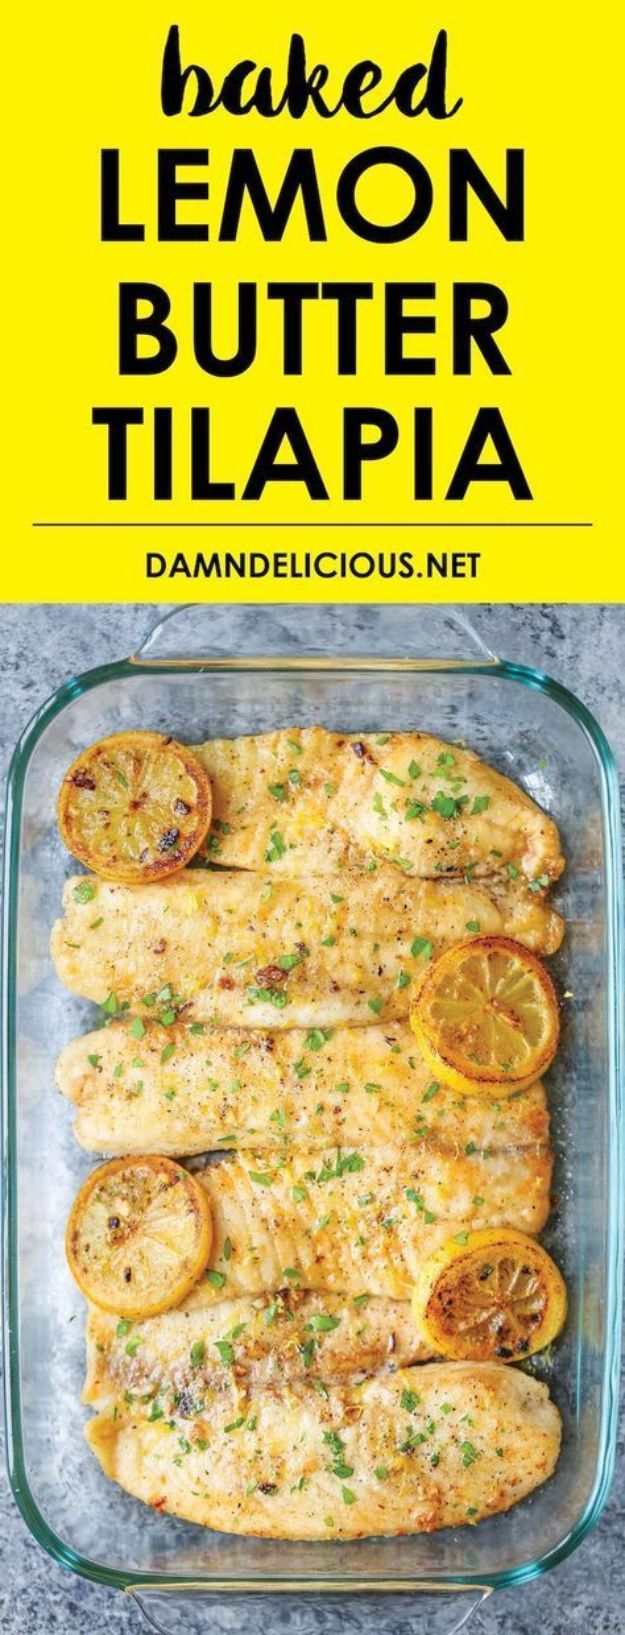 Tilapia Recipes - Baked Lemon Butter Tilapia - Best Recipe Ideas for Tilapia Fish - Dinner, Lunch, Snacks and Appetizers - Healthy Foods, Gluten Free Low Carb and Keto Friendly Dishes - Salads, Pastas and Easy Weeknight Dinners, Lunches for Work - Broiled, Grilled, Lemon Baked, Fried and Quick Ways to Make Tilapia #fish #healthy #recipes